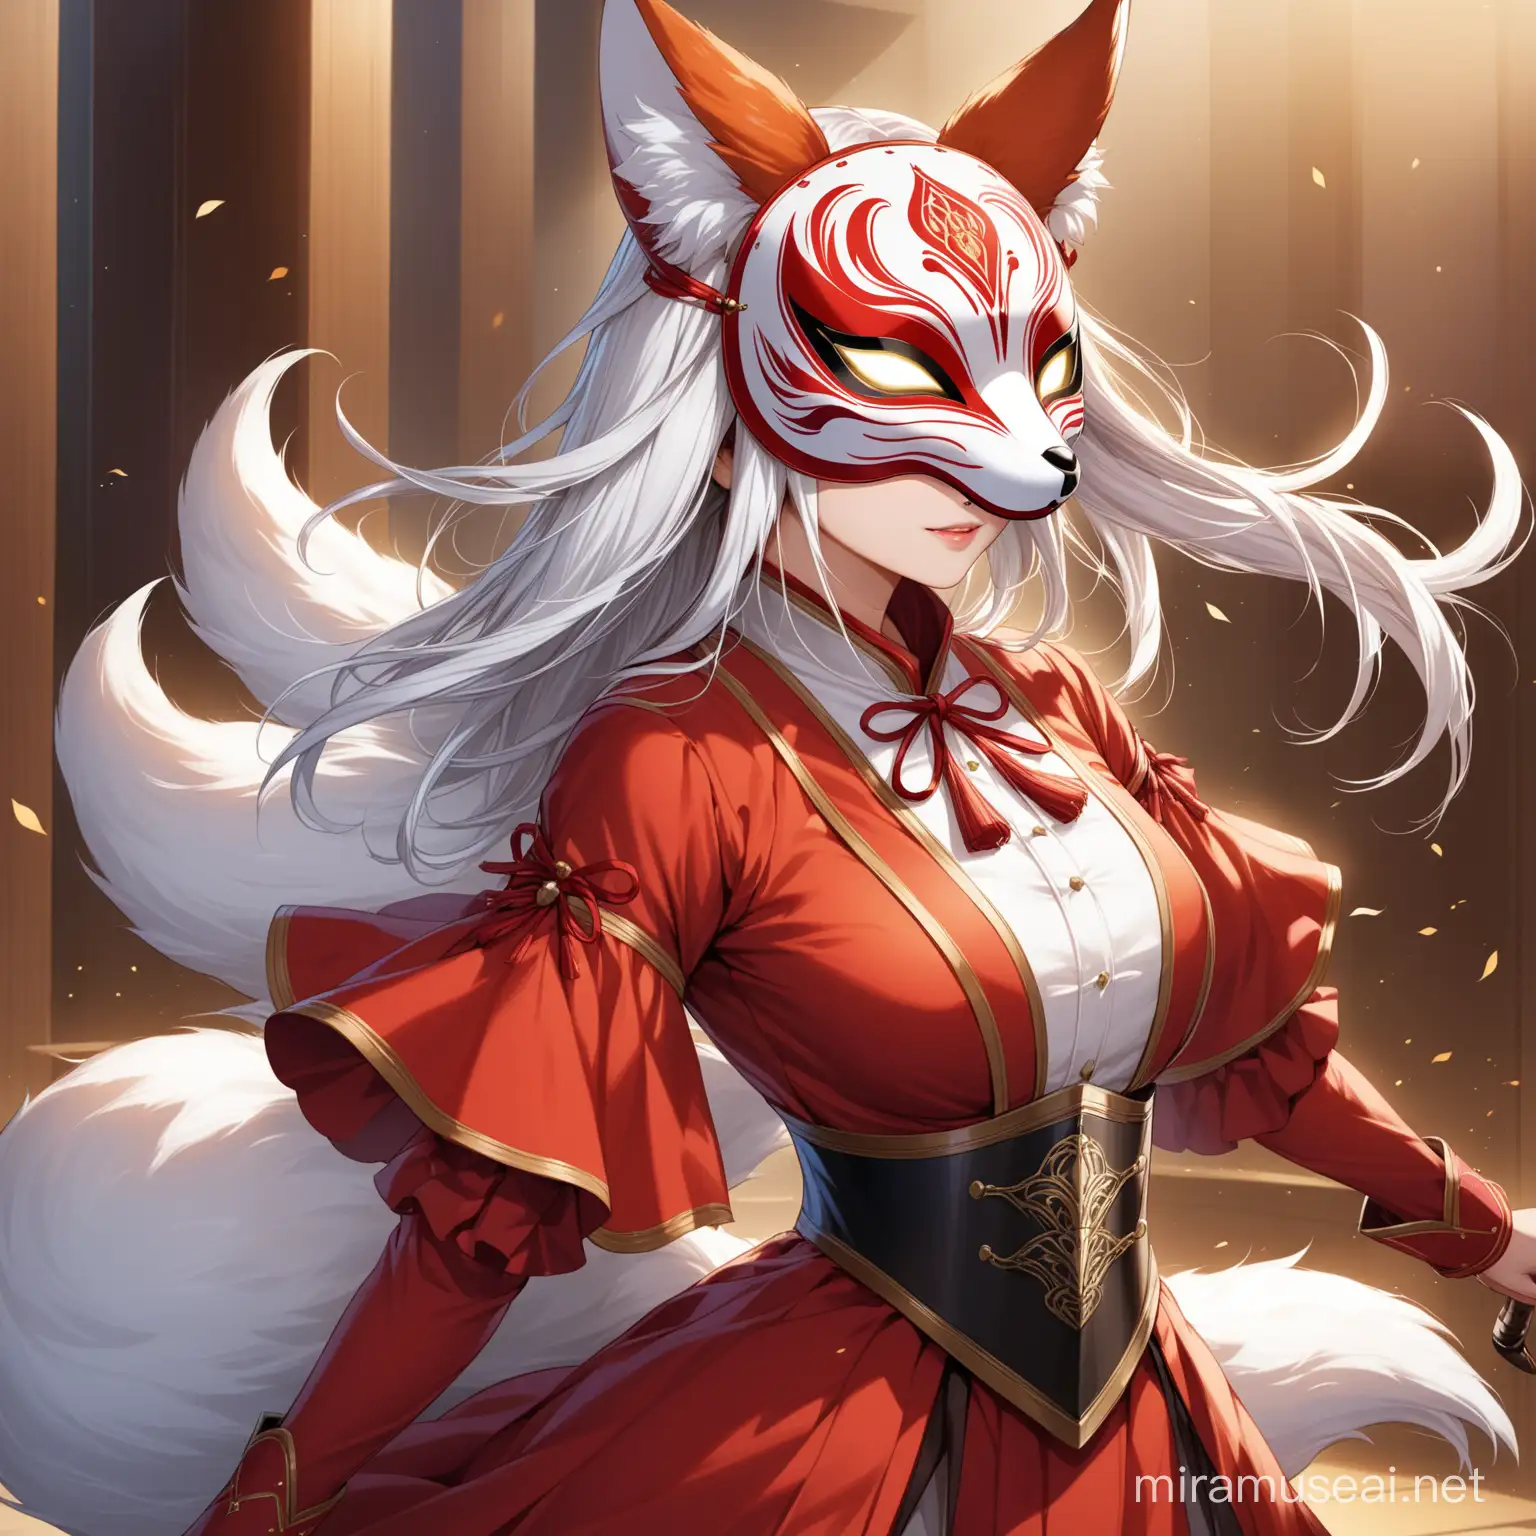 (((masterpiece))), best quality, expressive eyes, perfect face, woman in a fox mask, Noble woman duelist wearing fox furri mask, 